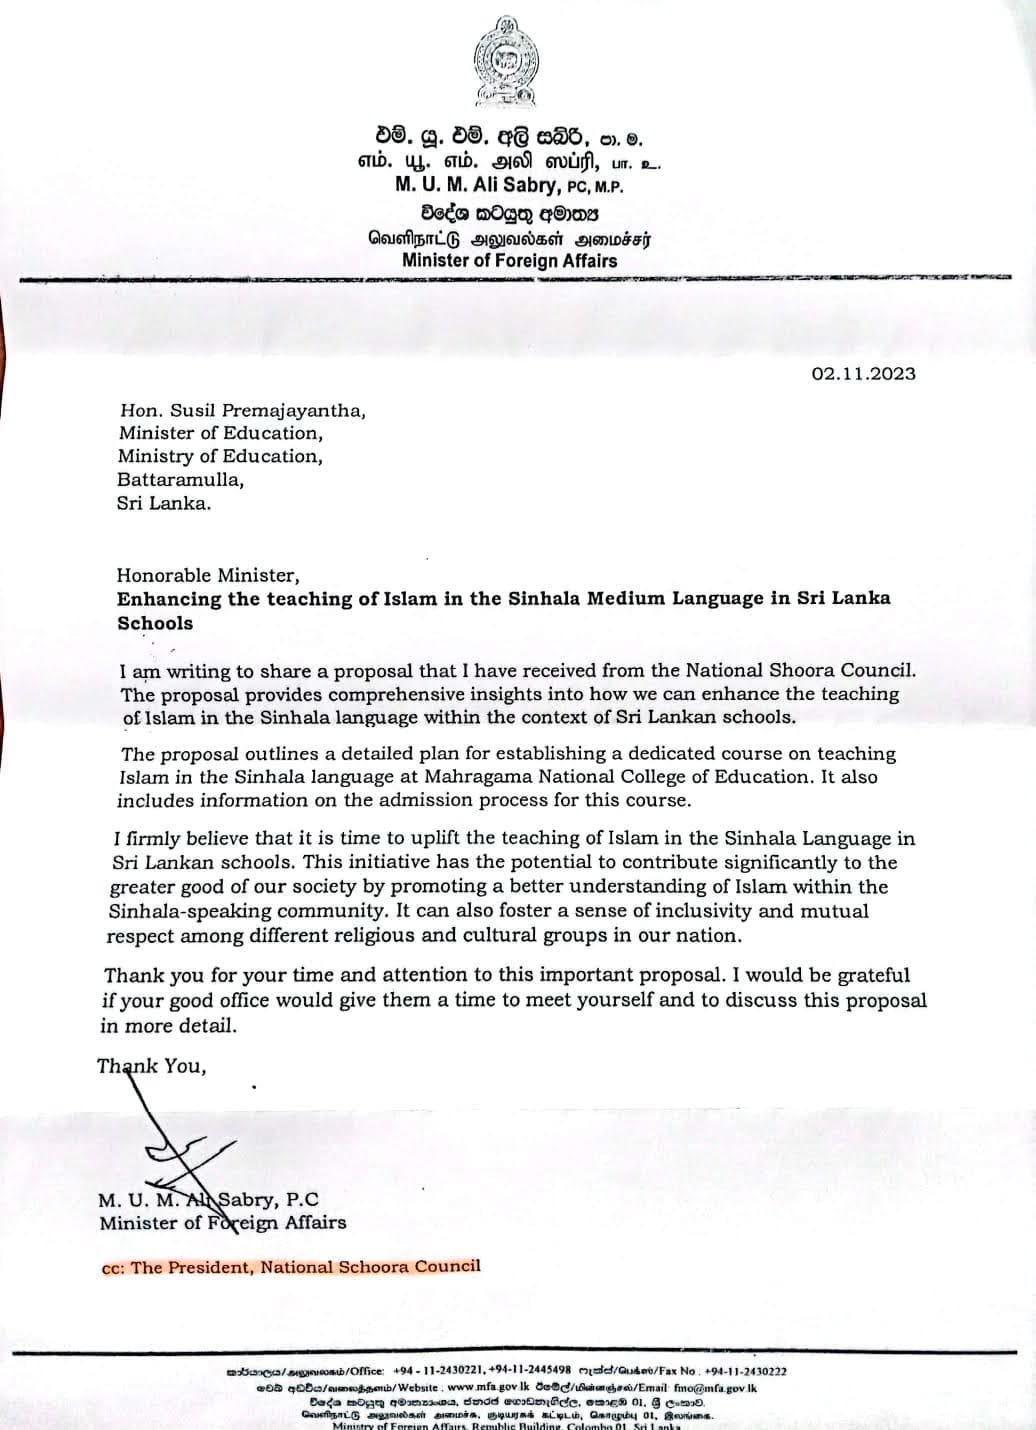 NSC Letter to the Education minister